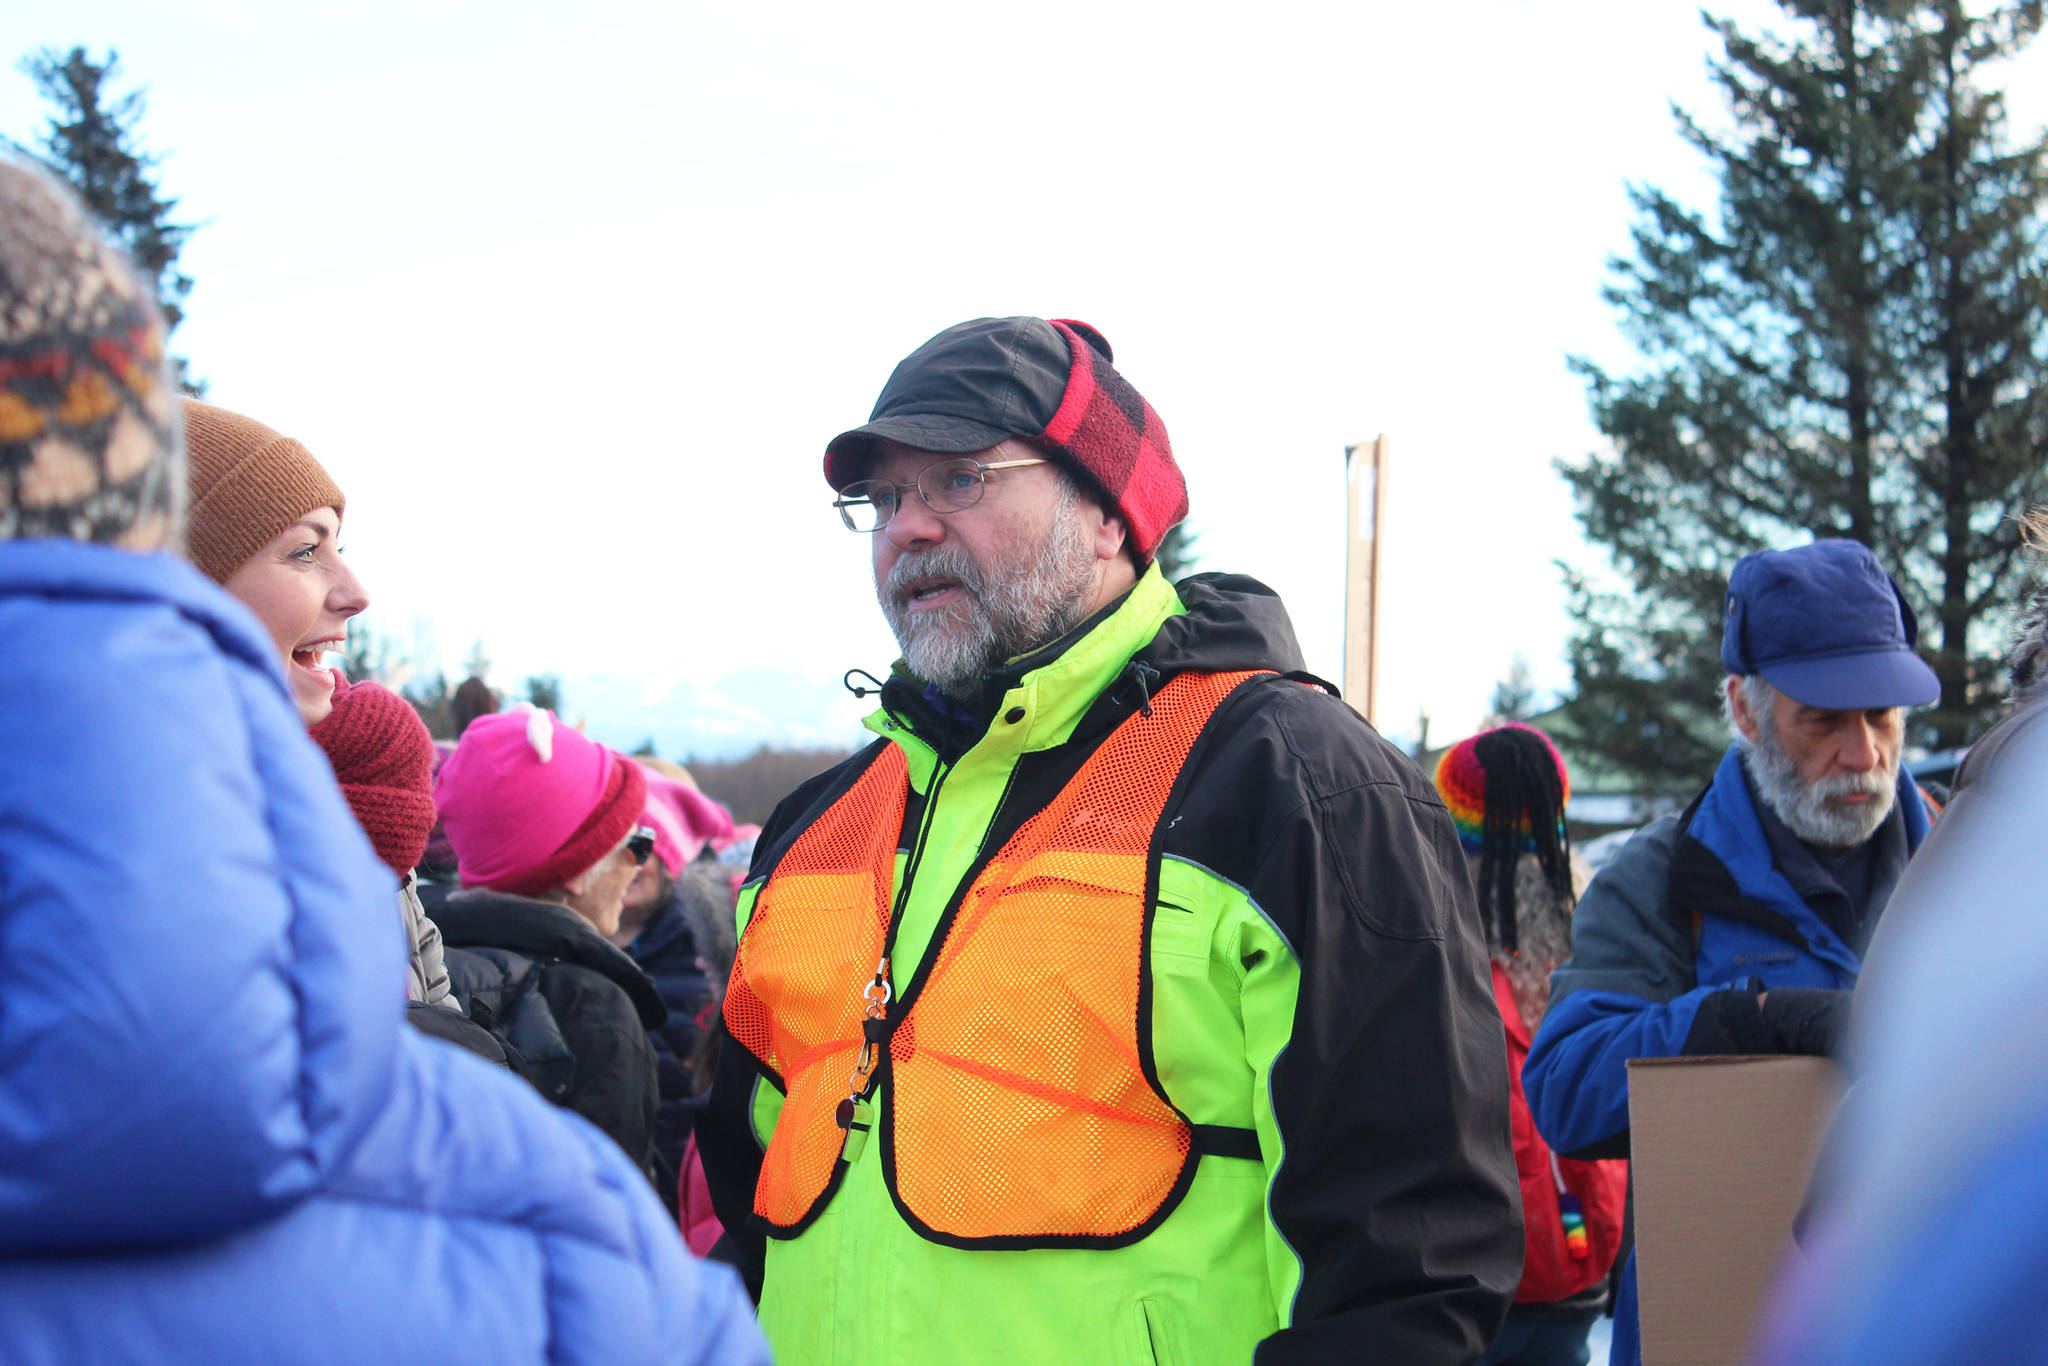 Kenai Peninsula Borough Assembly Member Willy Dunne mingles with Homer area residents shortly before the Women’s March on Homer 2018, in the parking lot of the HERC Building, on Saturday, Jan. 20, 2018 in Homer, Alaska. (Photo by Megan Pacer/Homer News)